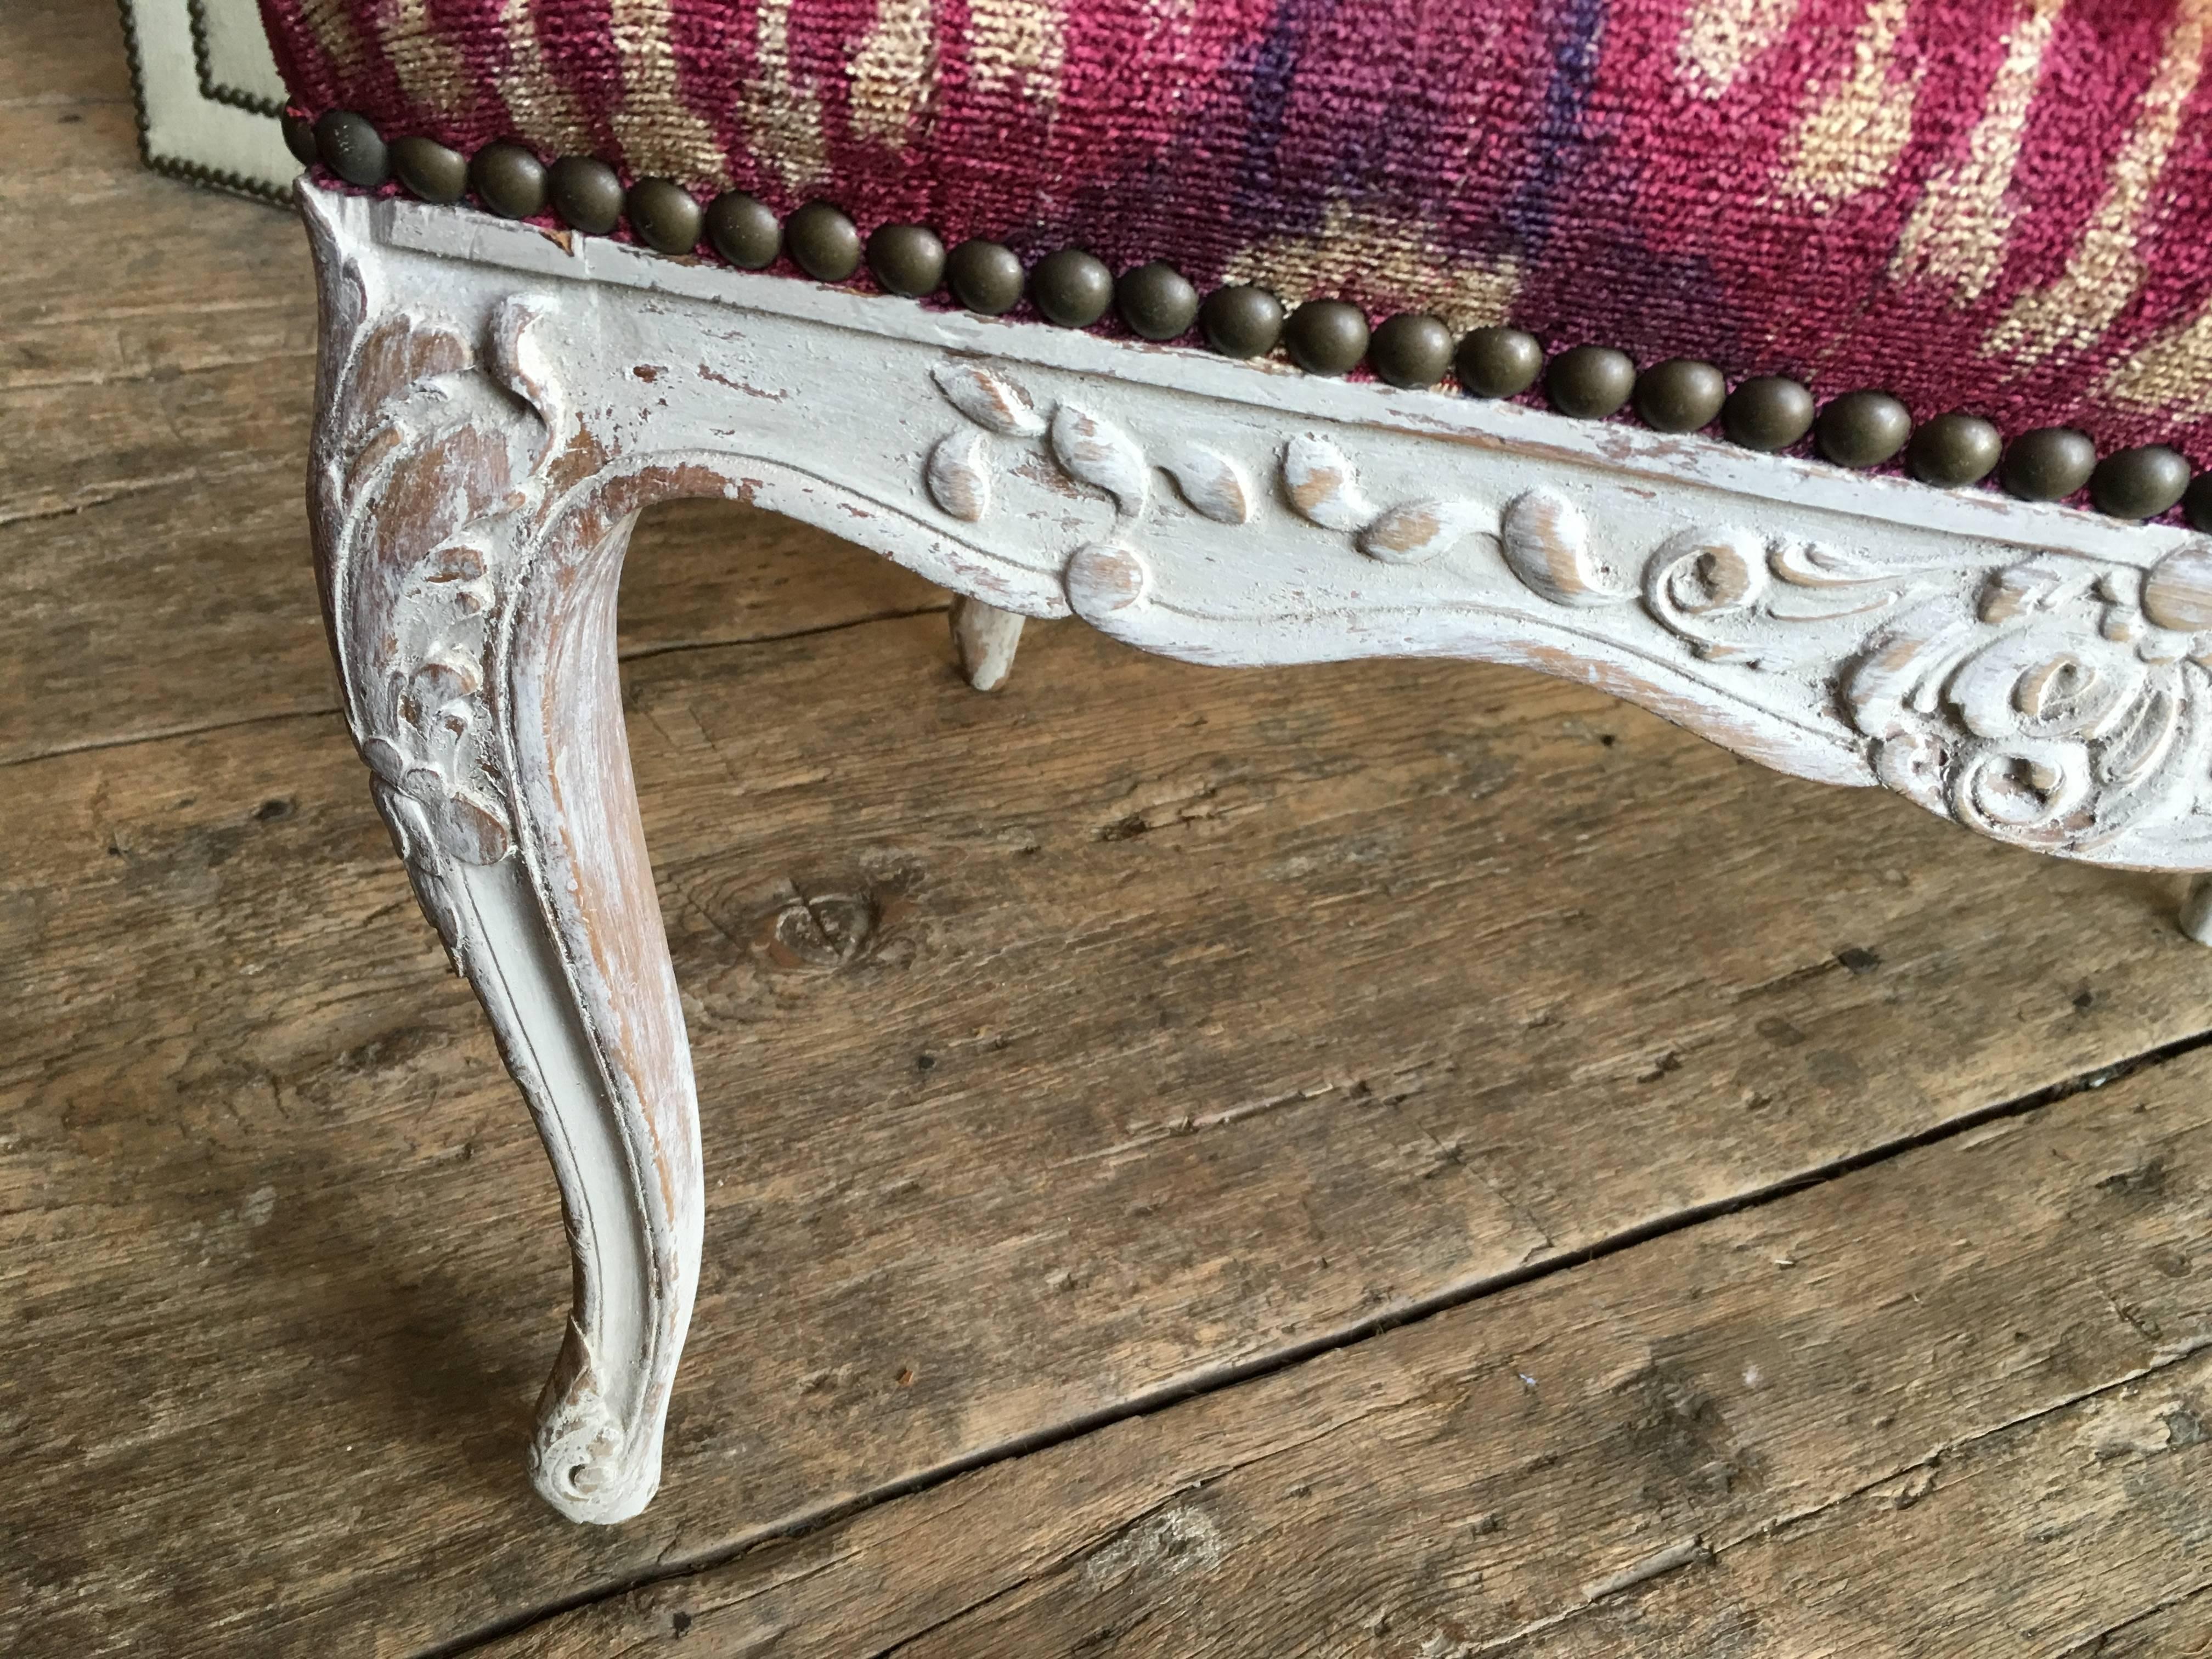 A Louis XV style carved and painted two-seat window bench, with cabriole legs and scalloped apron, late 19th century French, recently upholstered in burgundy handmade silk velvet. Great size for the foot of a bed.